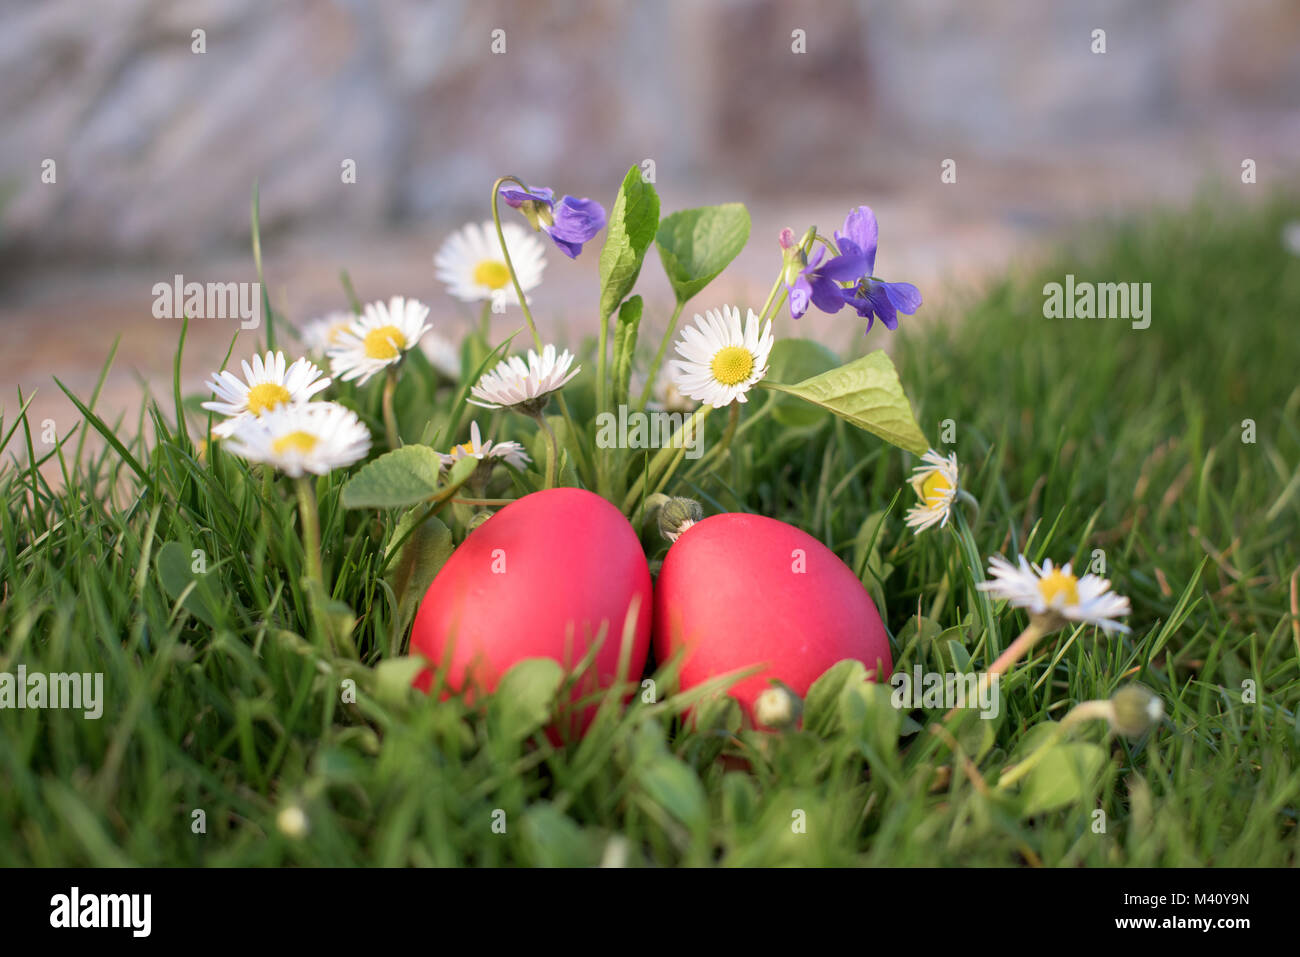 Close up of two red Easter eggs among flowers Stock Photo